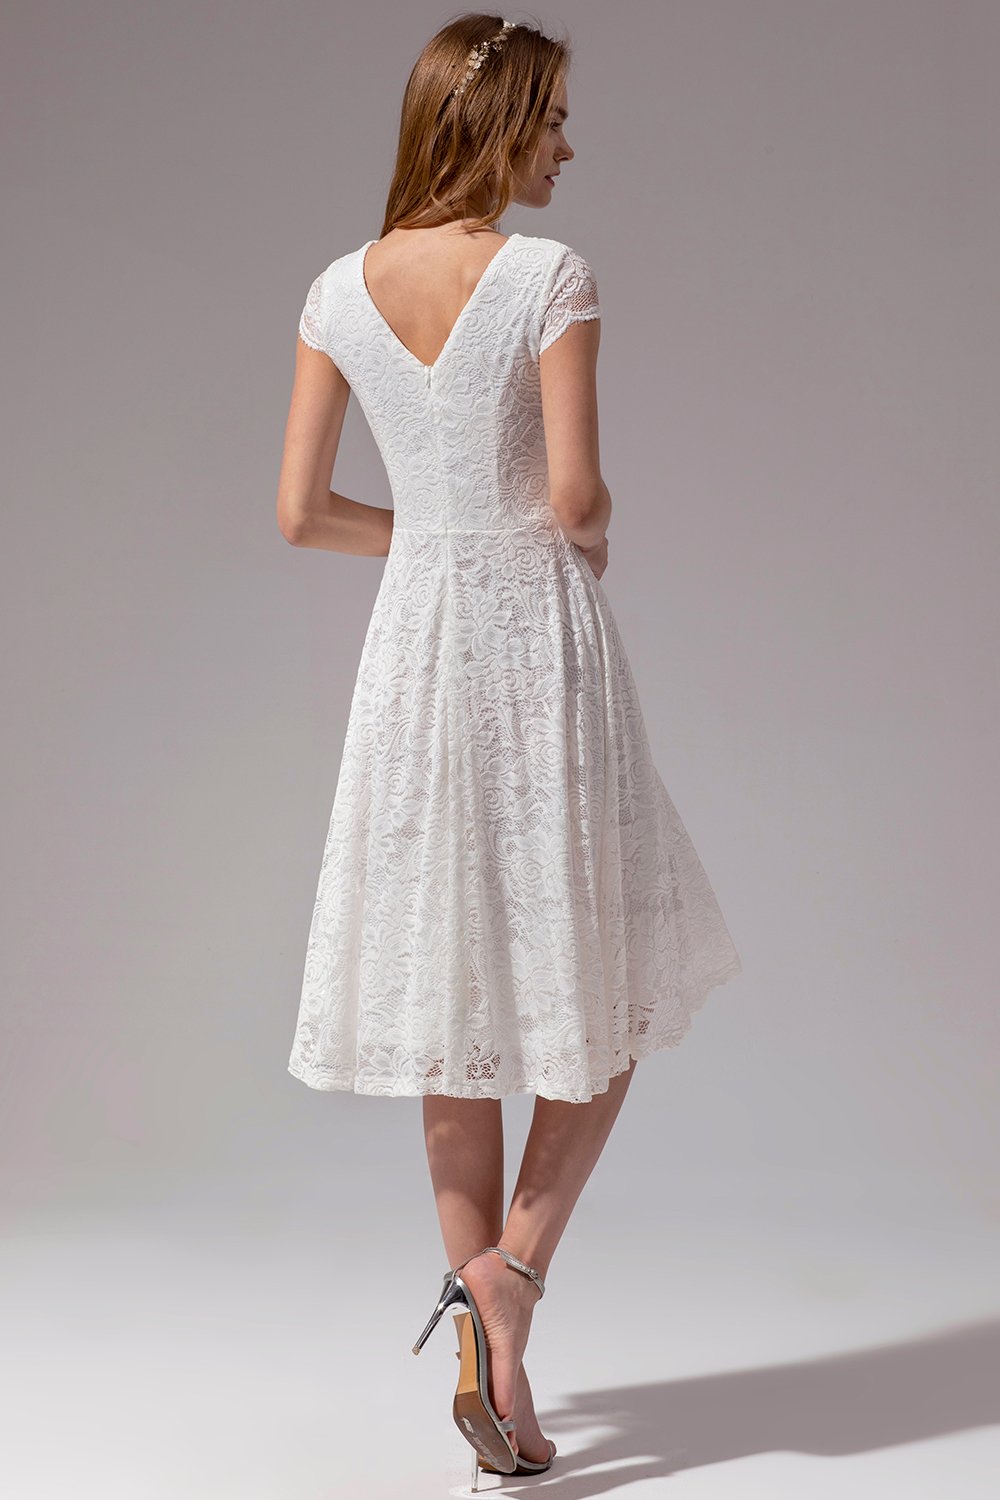 Time-Limited Spike For White Lace Dress (1 pc - Random Style & Color)